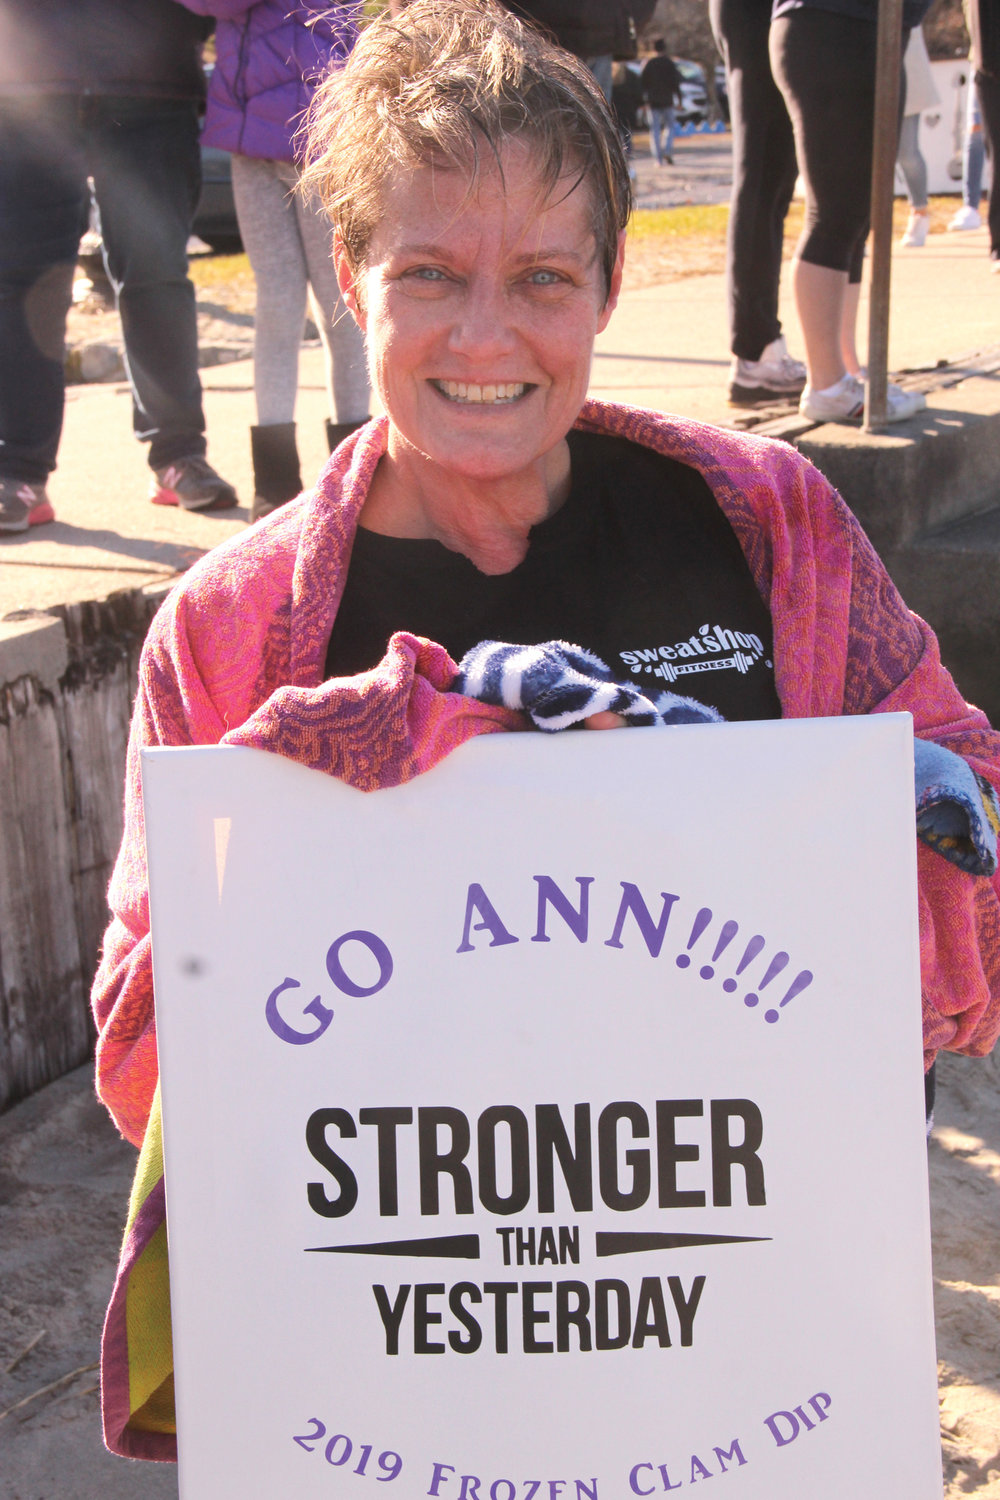 SIGN OF SUPPORT: Ann Altshuler who did the Obstaplunge displays the sign co-workers made for her.